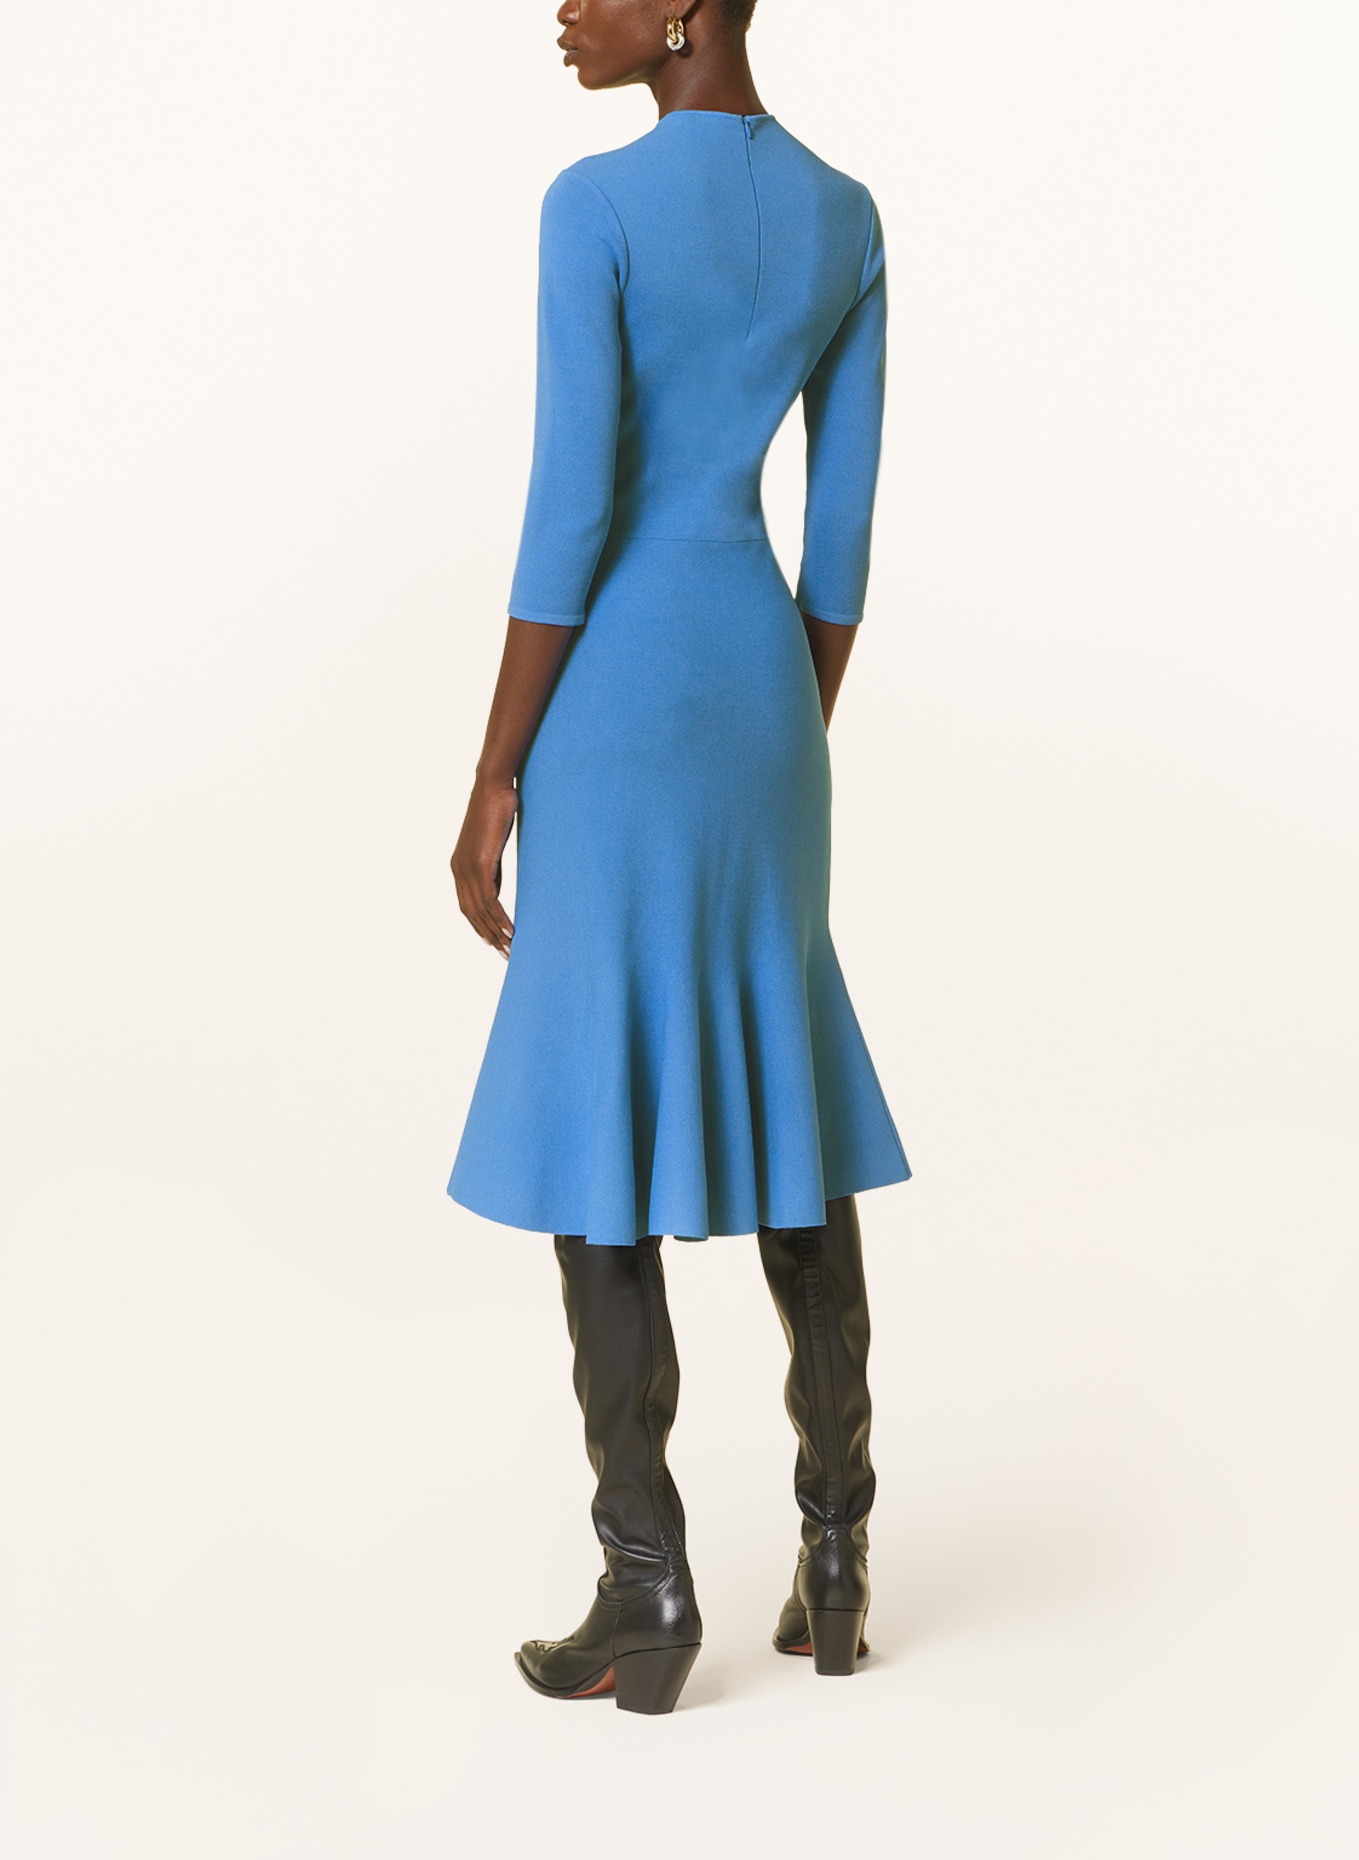 STELLA McCARTNEY Knit dress with 3/4 sleeve, Color: BLUE (Image 3)